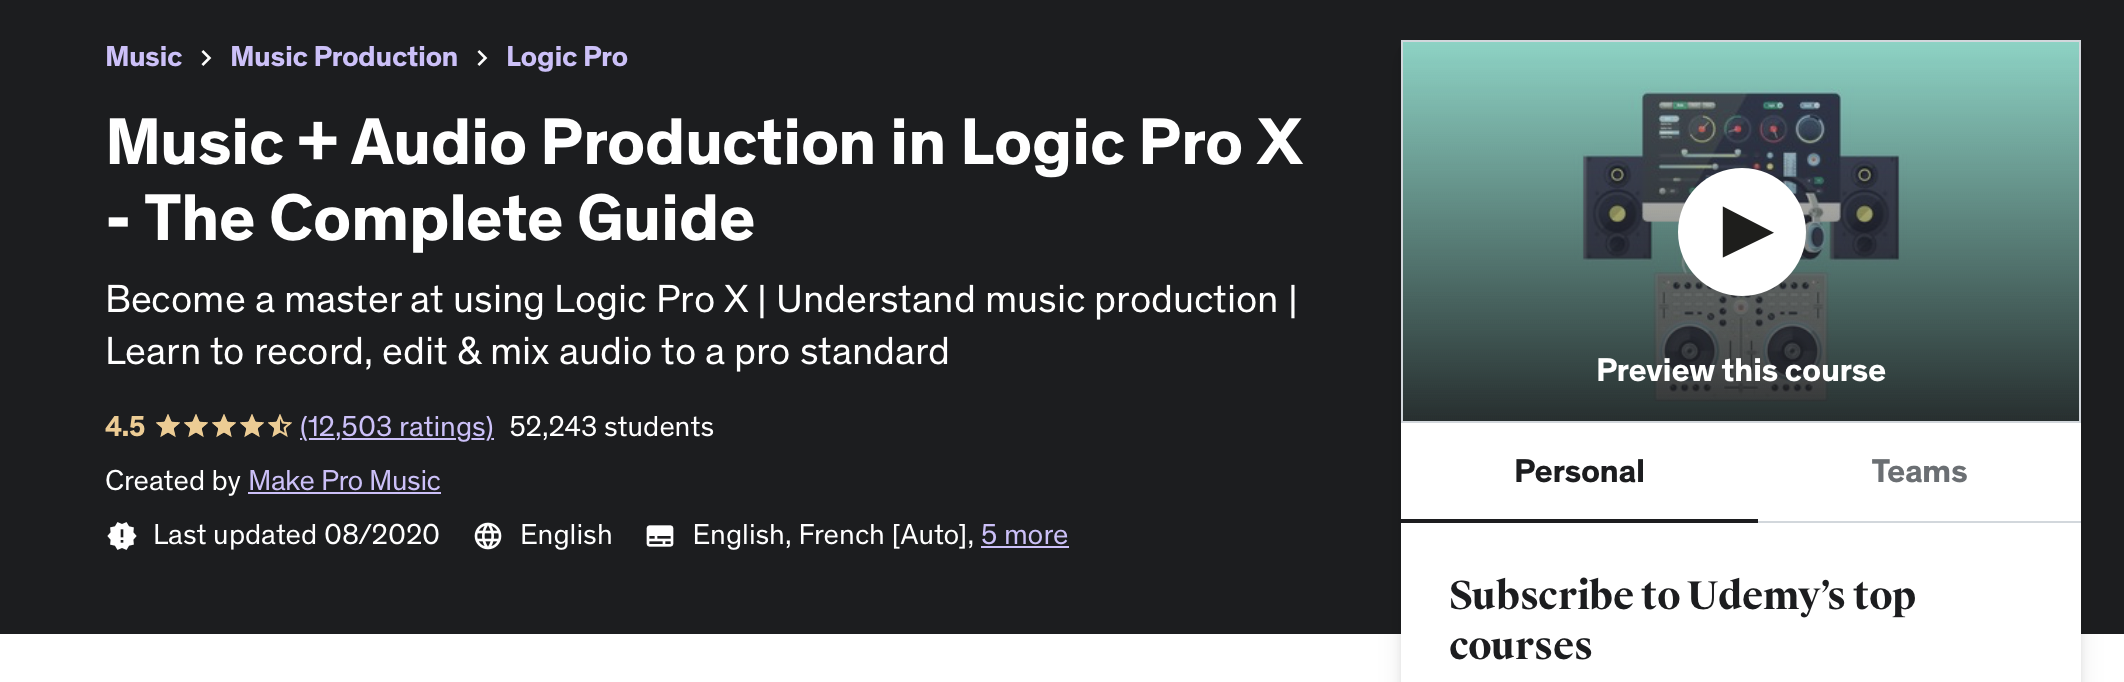 Music + Audio Production in Logic Pro X - The Complete Guide